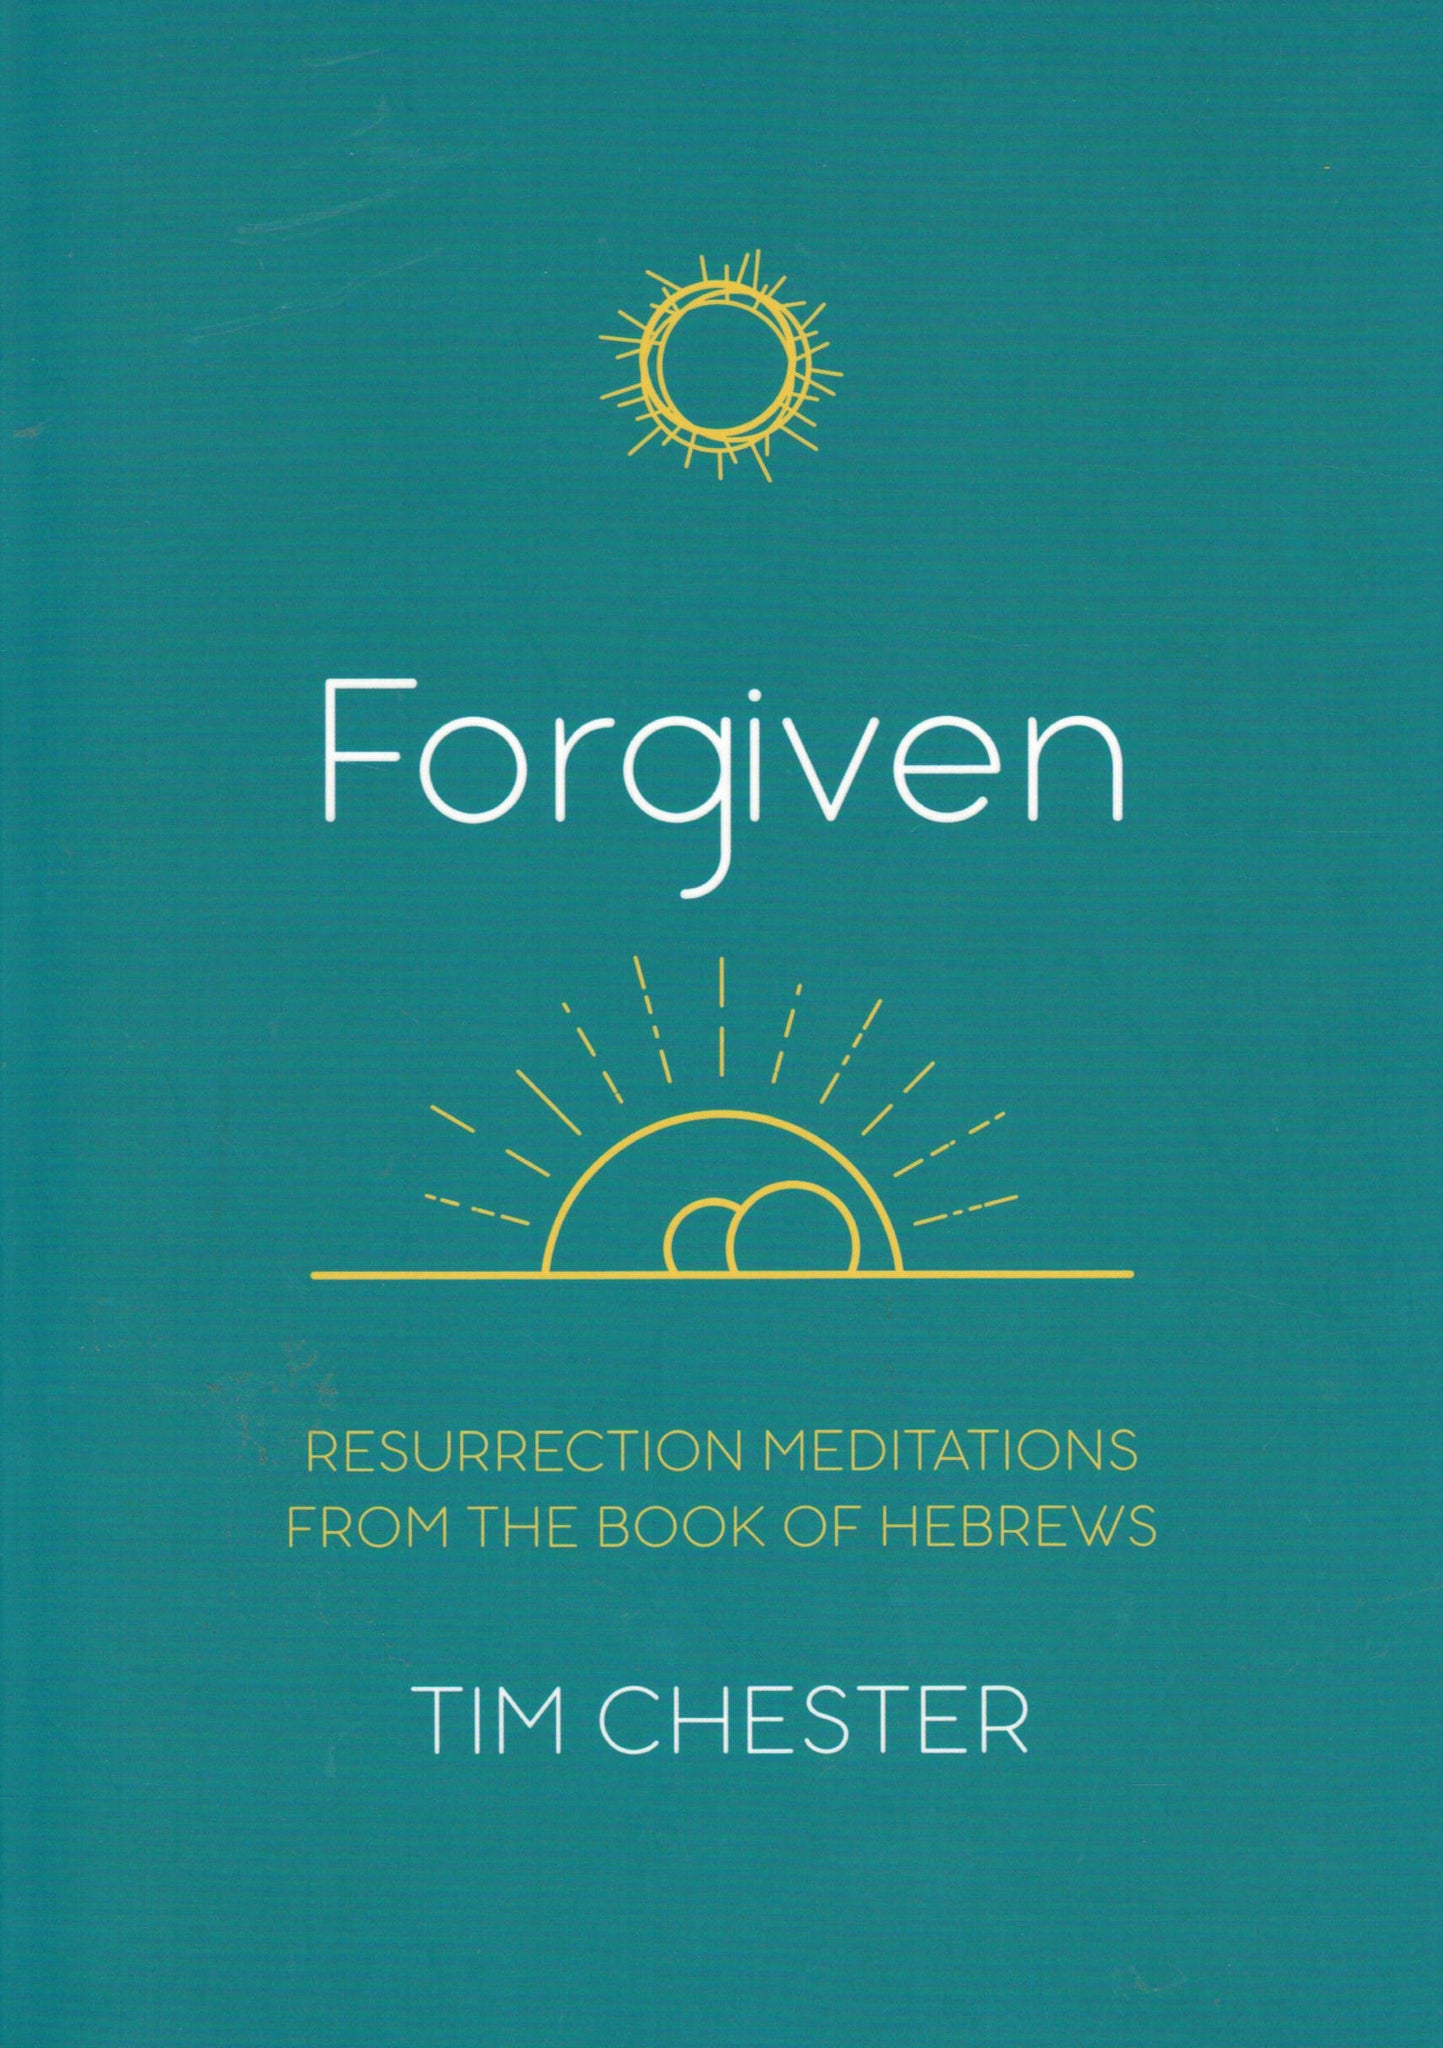 Forgiven: Resurrection Meditations from the Book of Hebrews